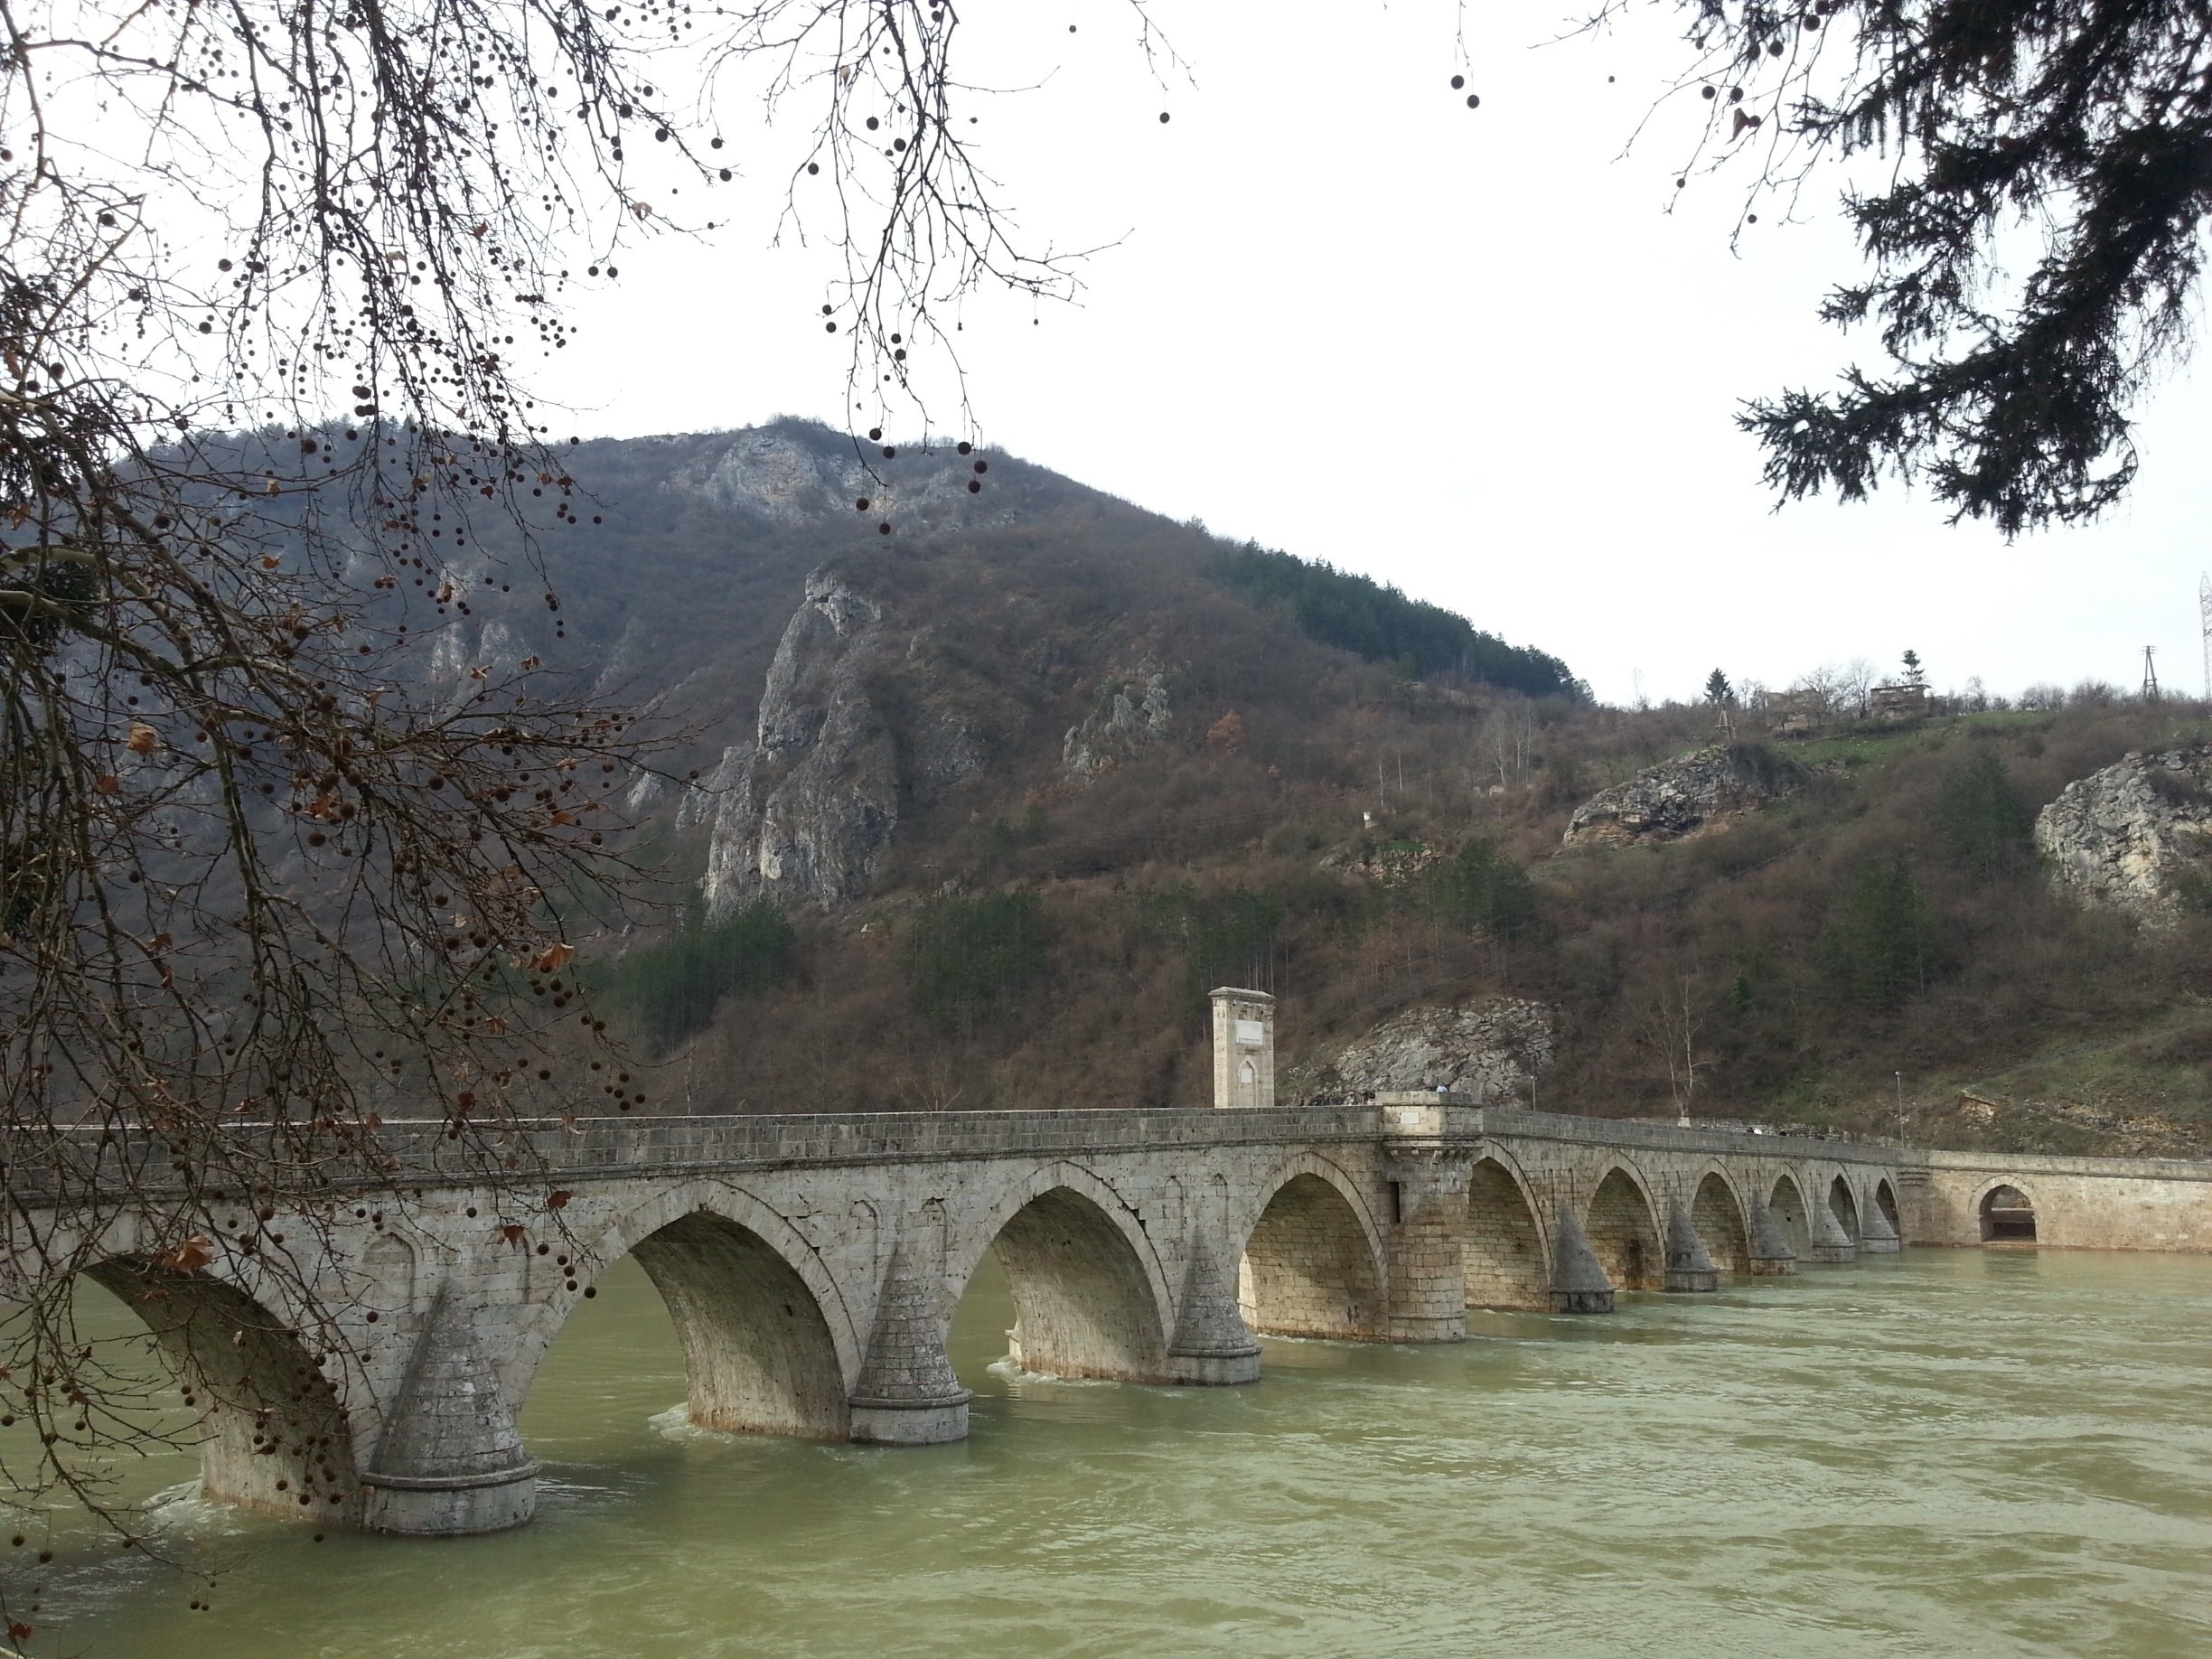 The Mehmed Paša Sokolović Bridge (Most Mehmed-paše Sokolovića) is a historic bridge in Višegrad, over the Drina River in eastern Bosnia and Herzegovina. It was completed in 1577 by the Ottoman court architect Mimar Sinan on the order of the Grand Vizier Mehmed Paša Sokolović.  UNESCO included the facility in its 2007 World Heritage List. #SpringFun